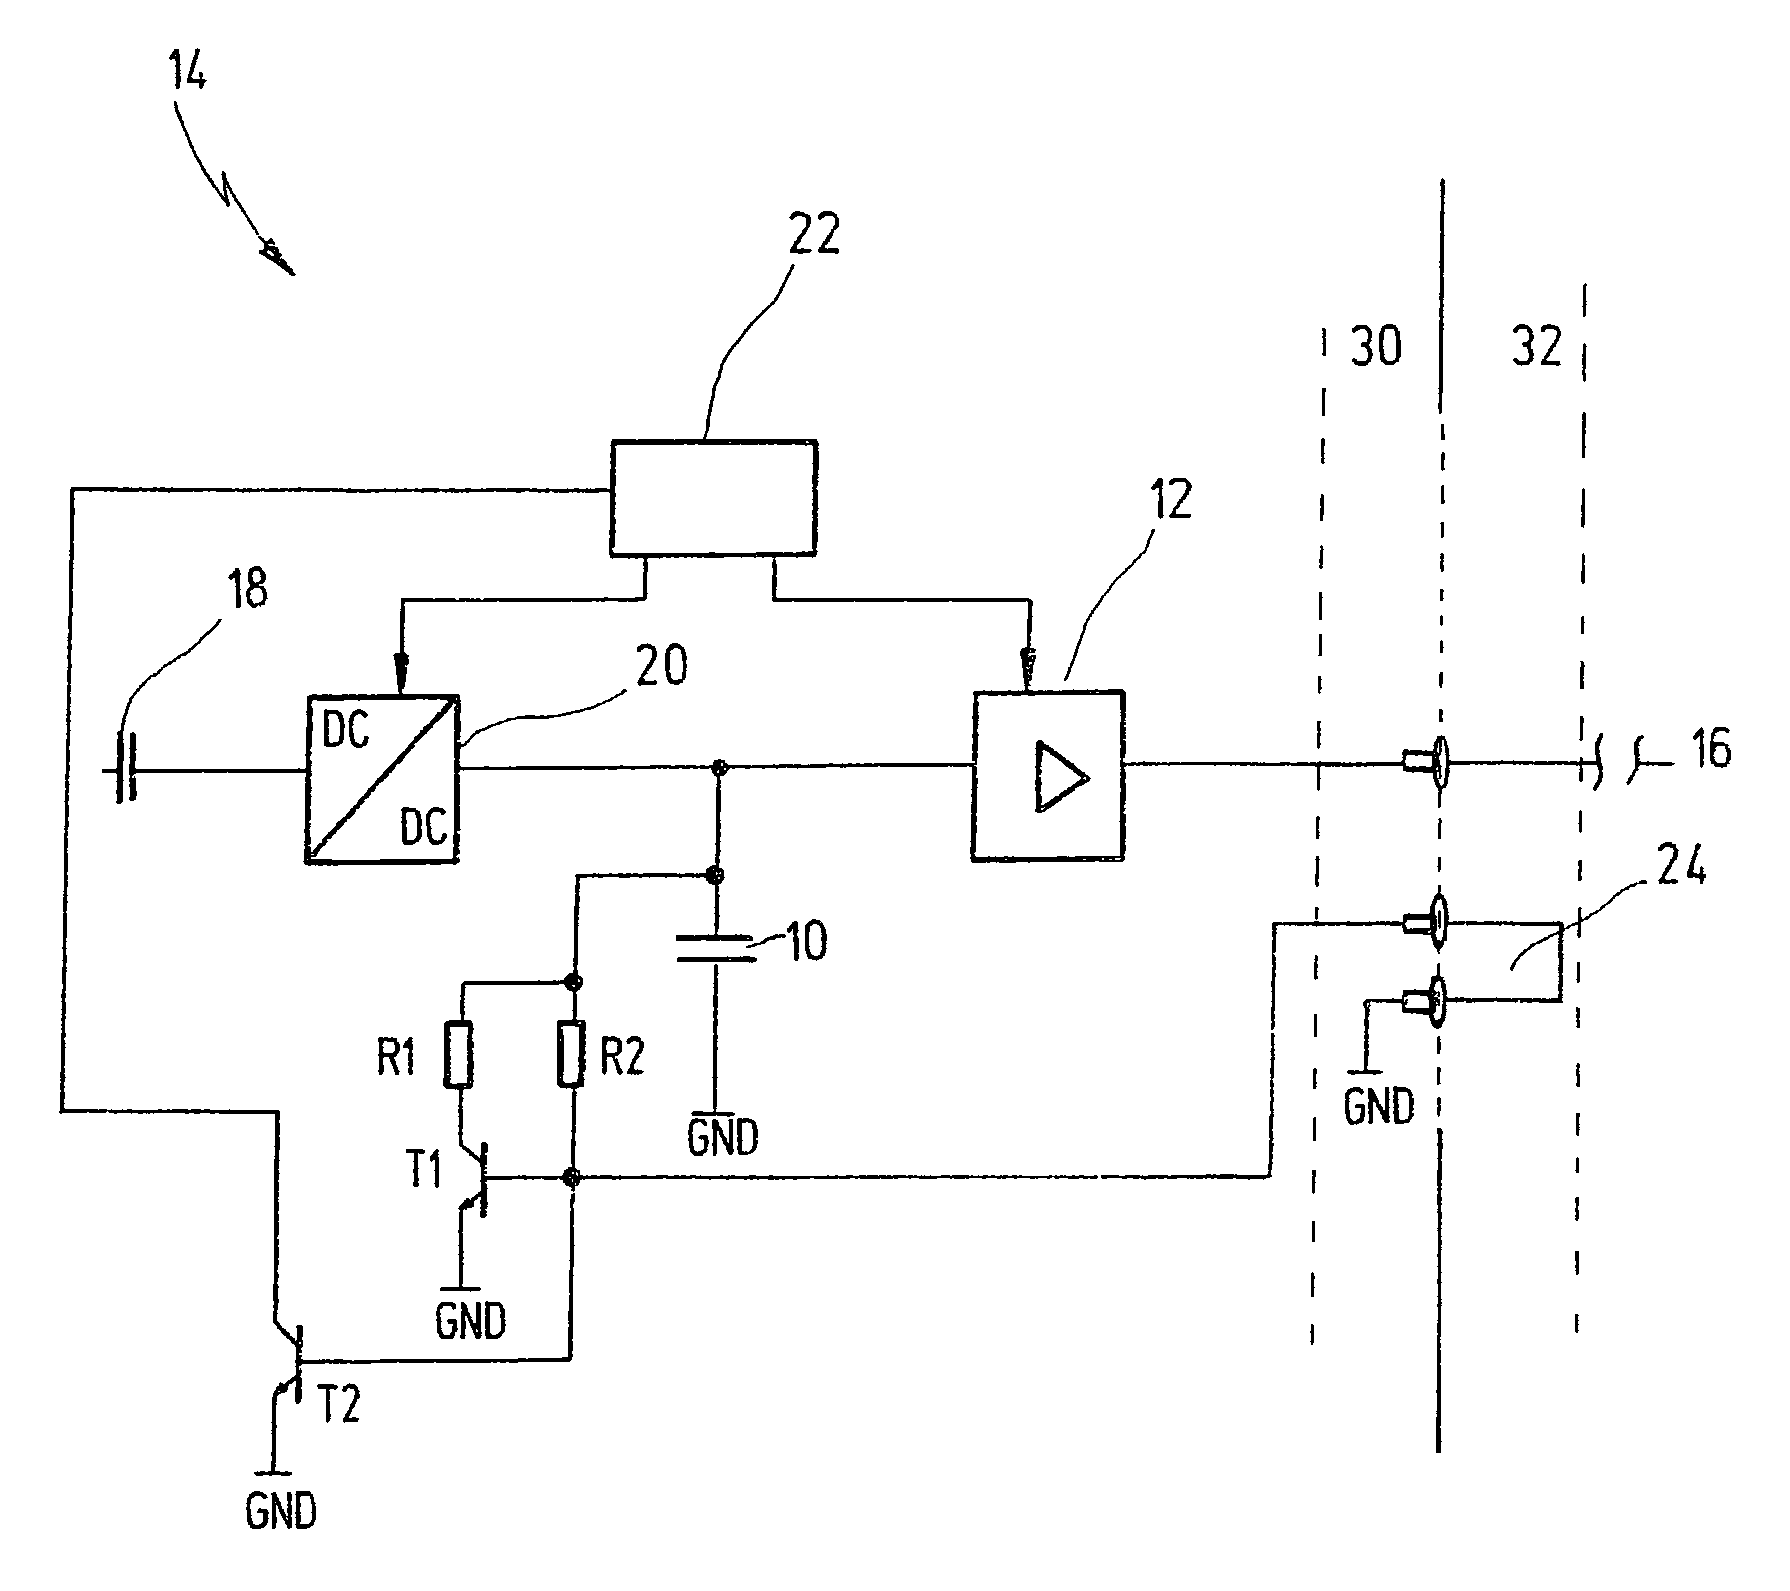 Circuit system for discharging a buffer capacitor used for supplying high voltage to a control unit, in particular a control unit for actuating a piezoelectric output stage